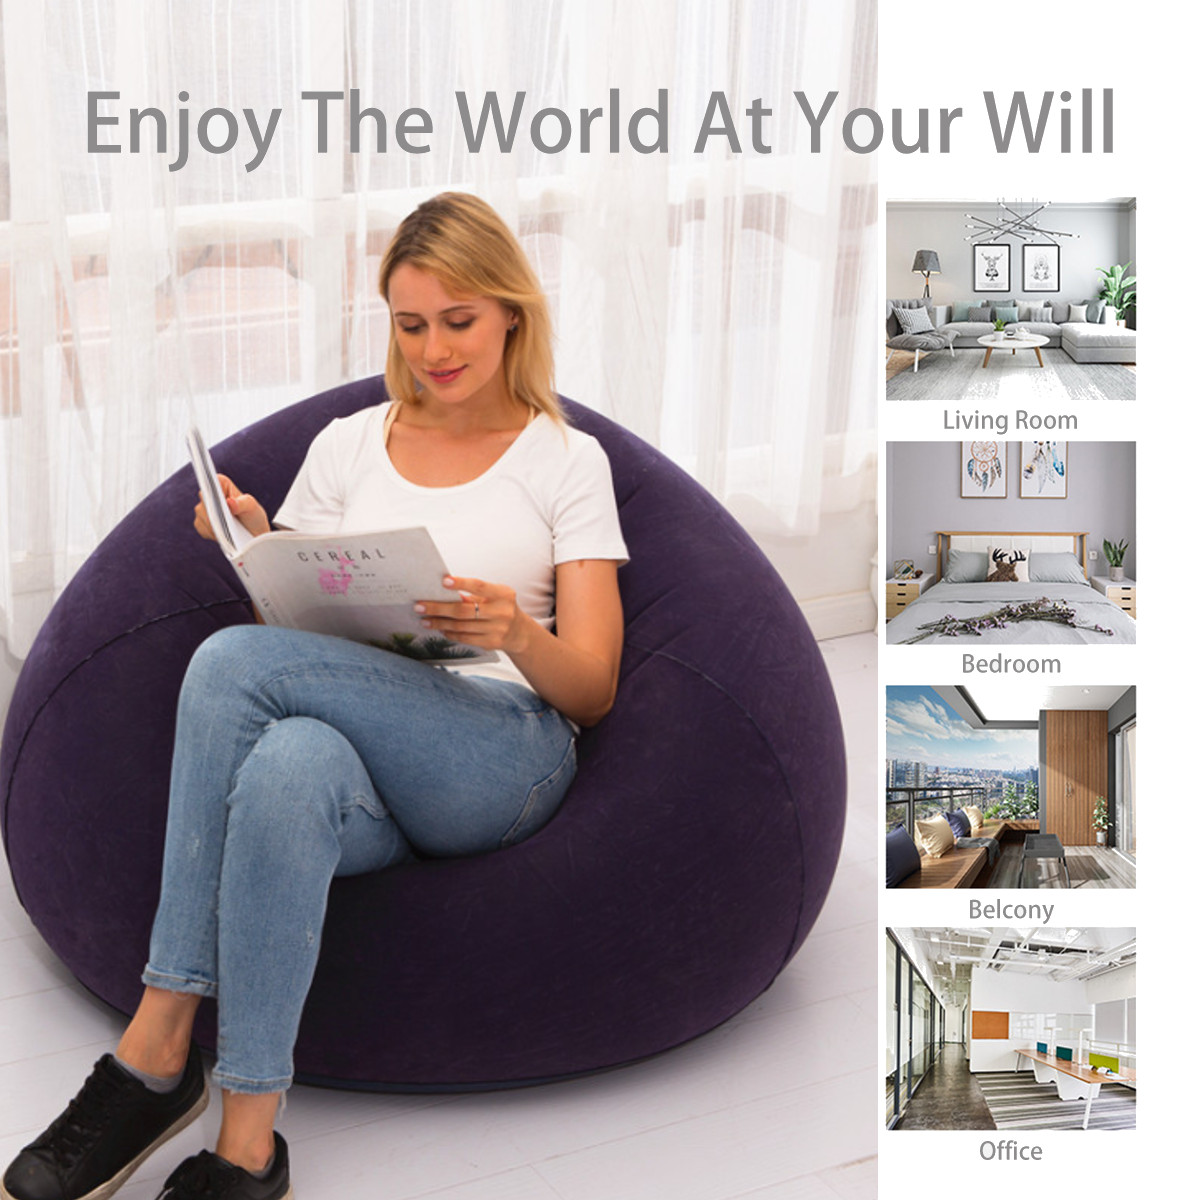 110x85cm-Large-Inflatable-Chair-Bean-Bag-PVC-IndoorOutdoor-Garden-Furniture-Lounge-Adult-Lazy-Sofa-N-1682288-3